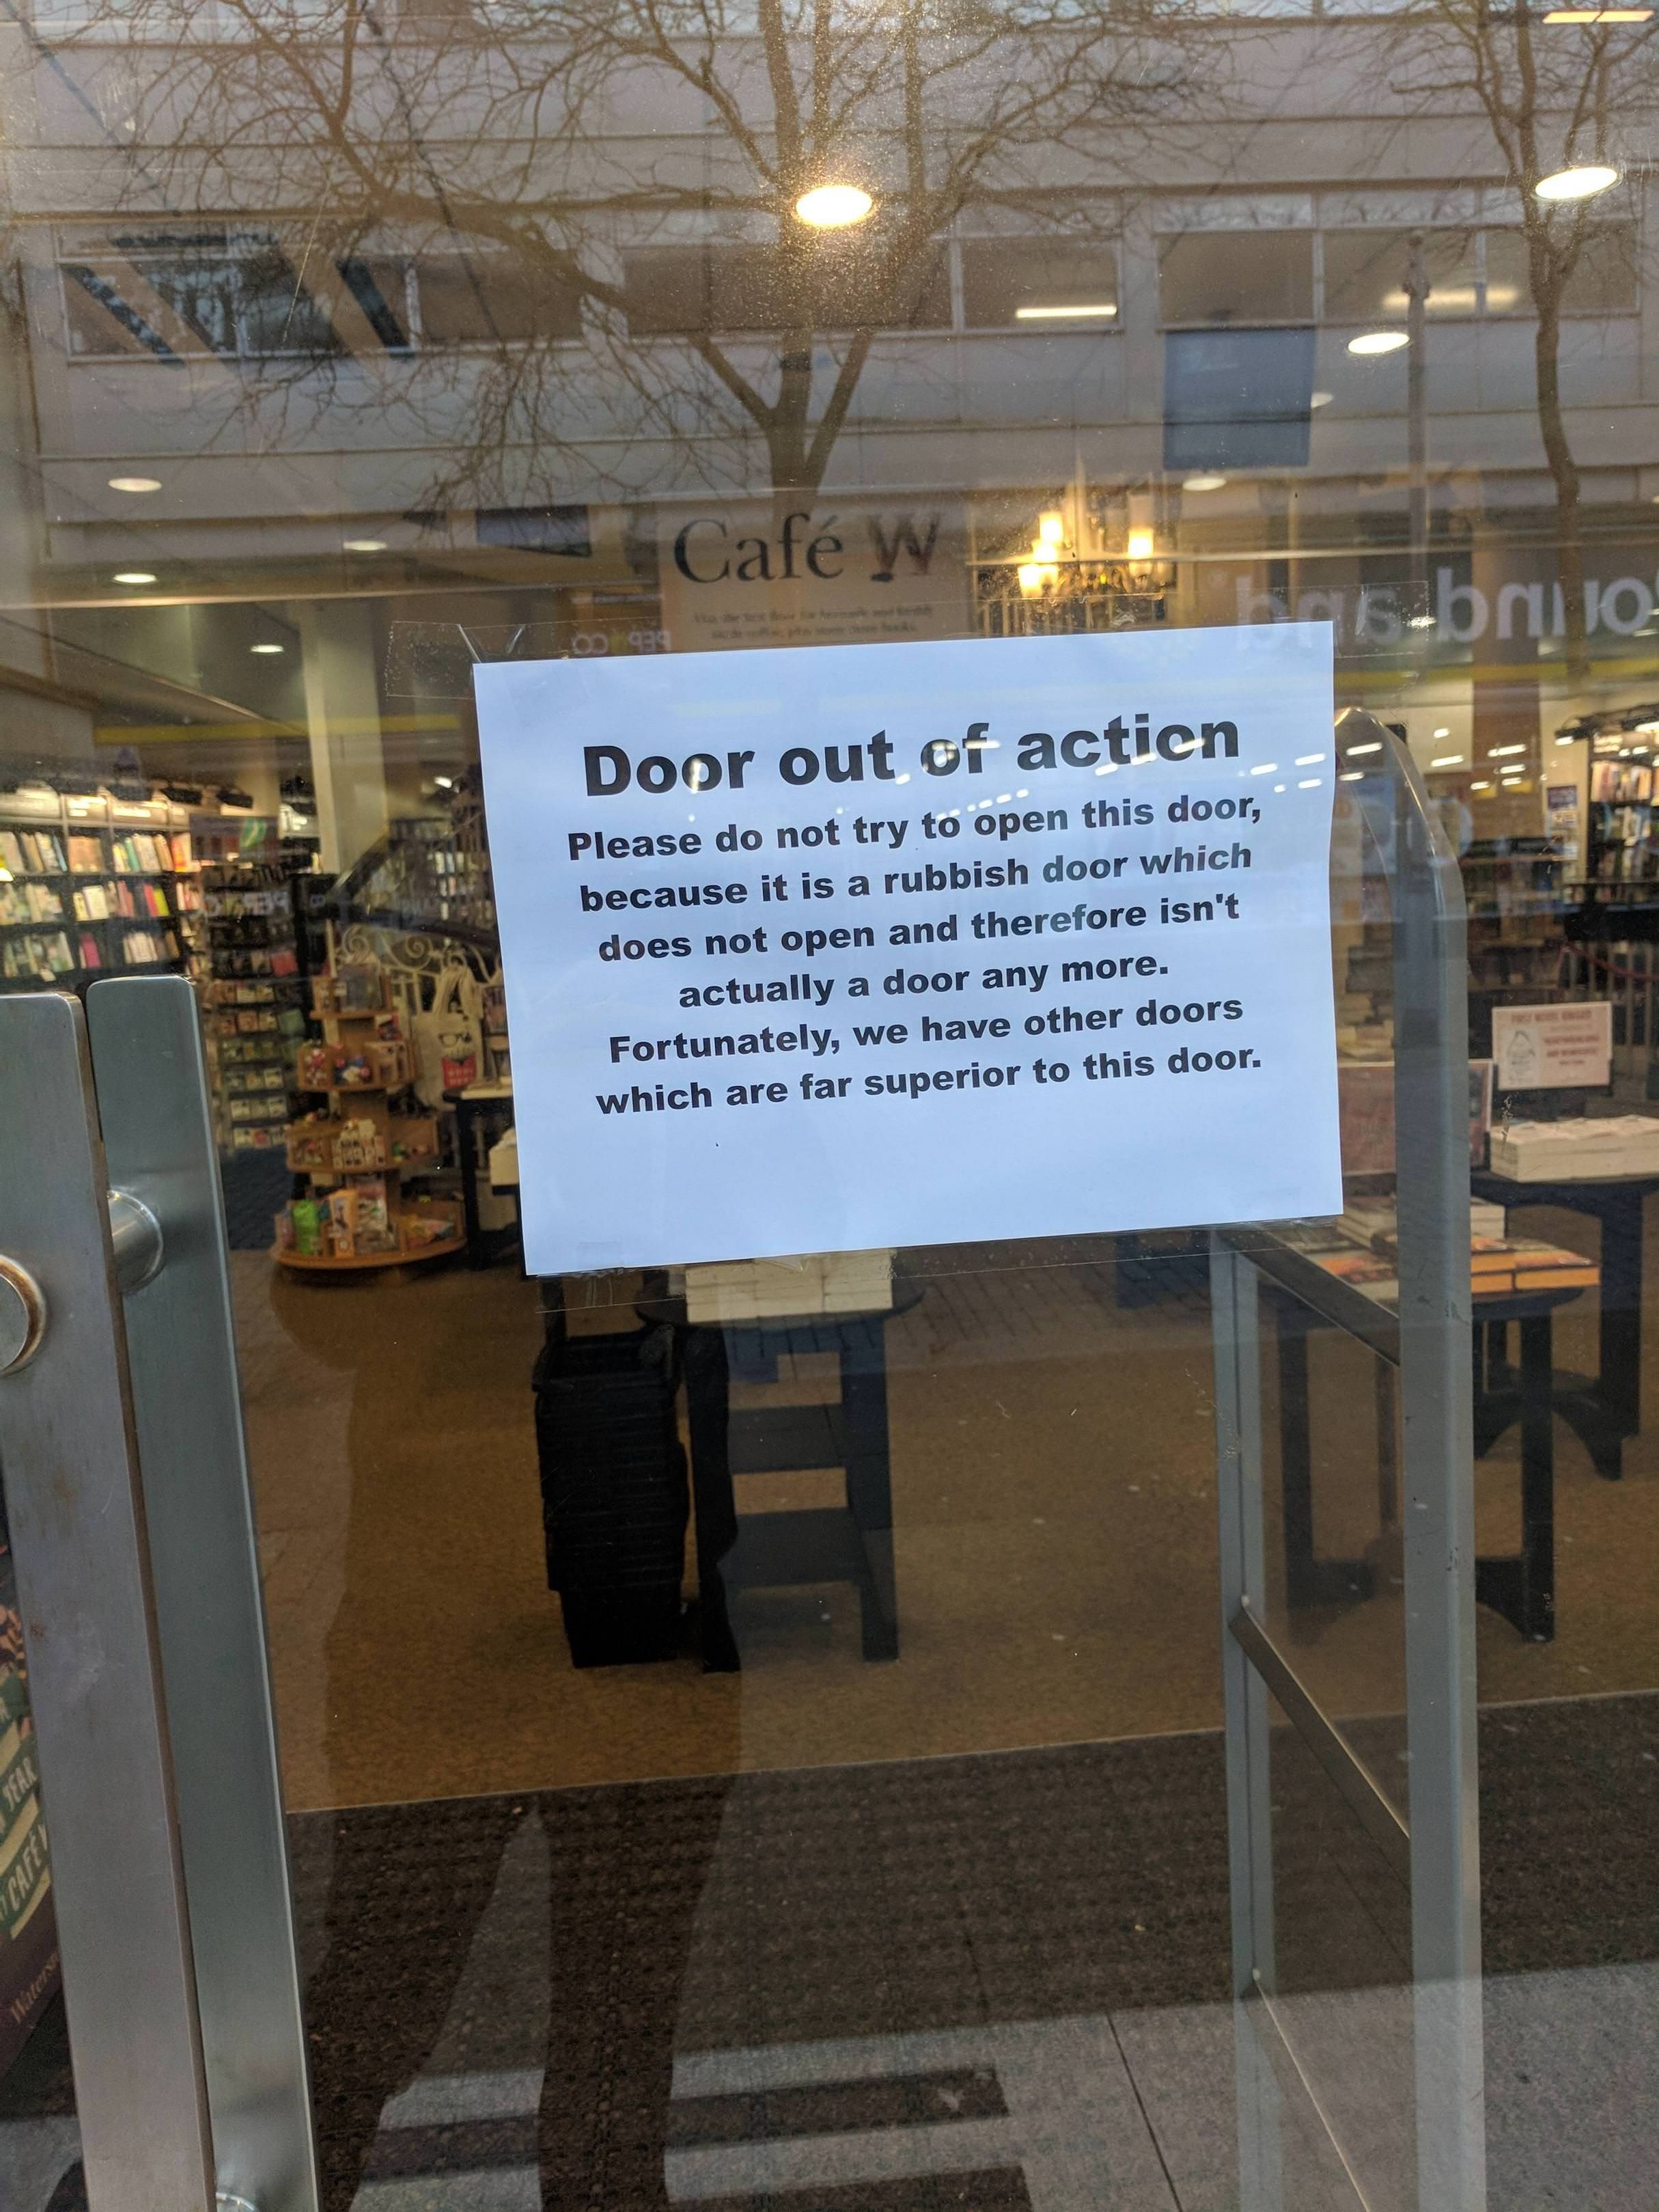 My local bookstore recently lost a door